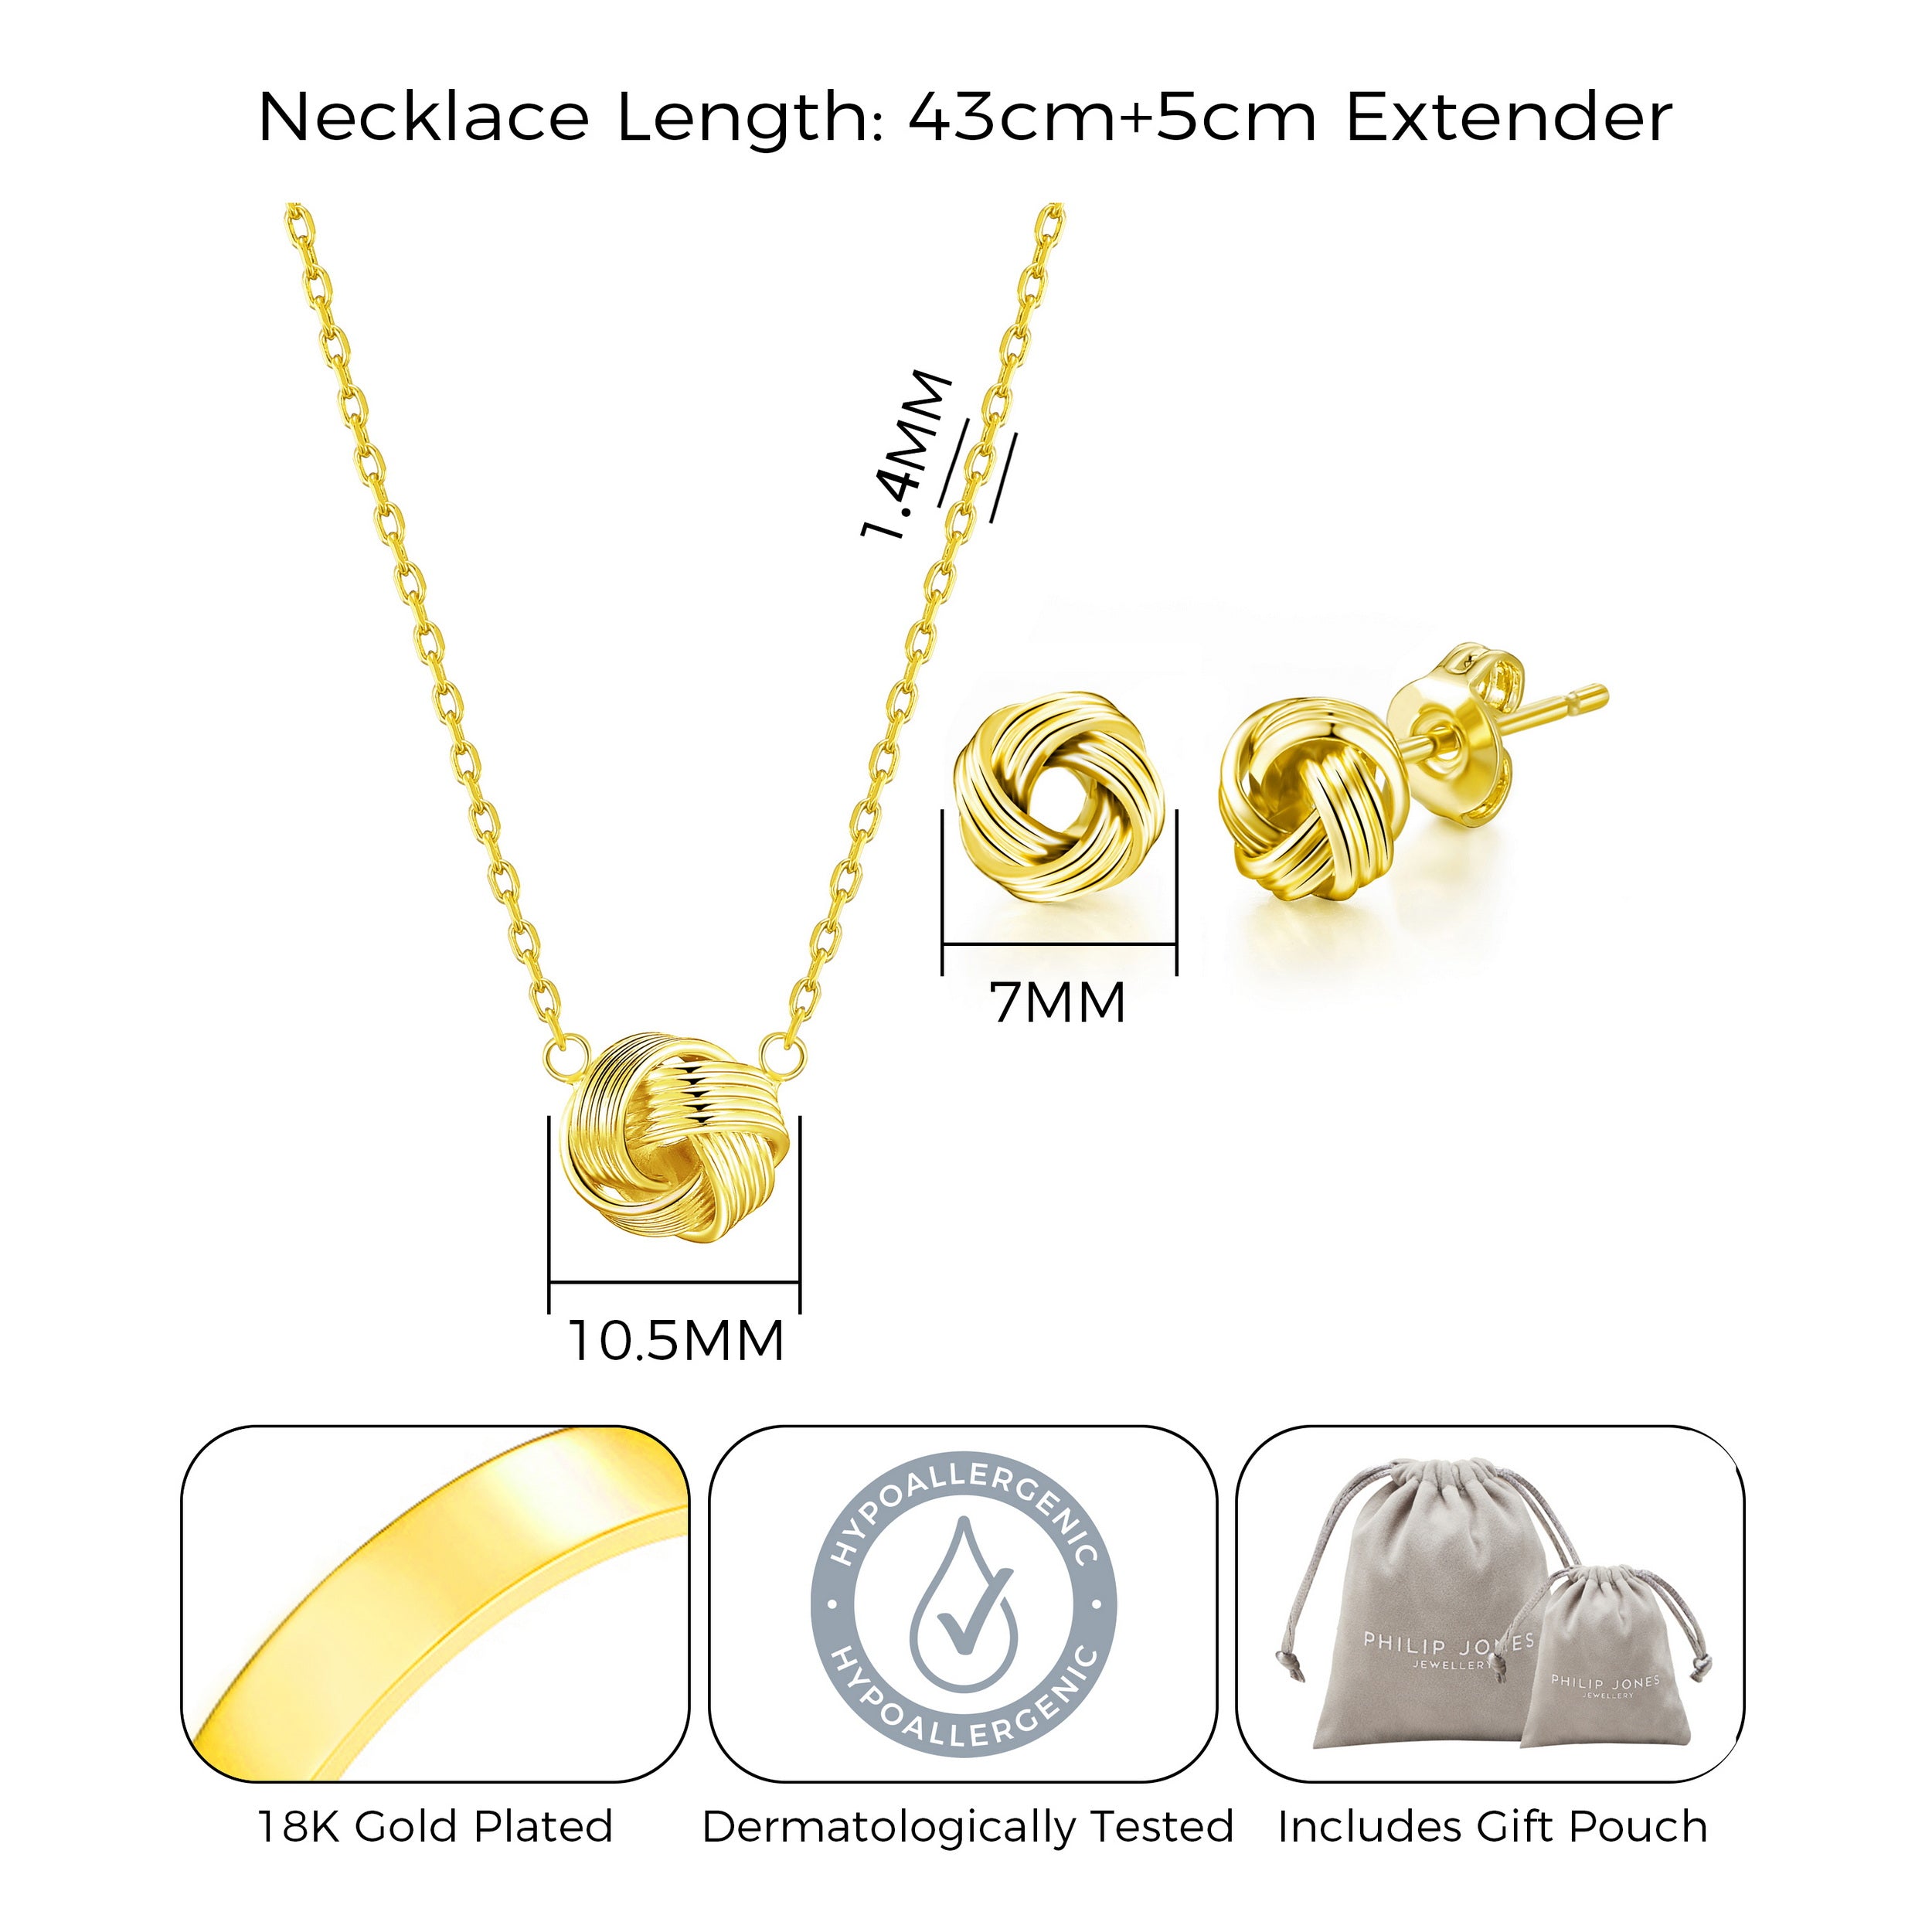 Gold Plated Love Knot Set